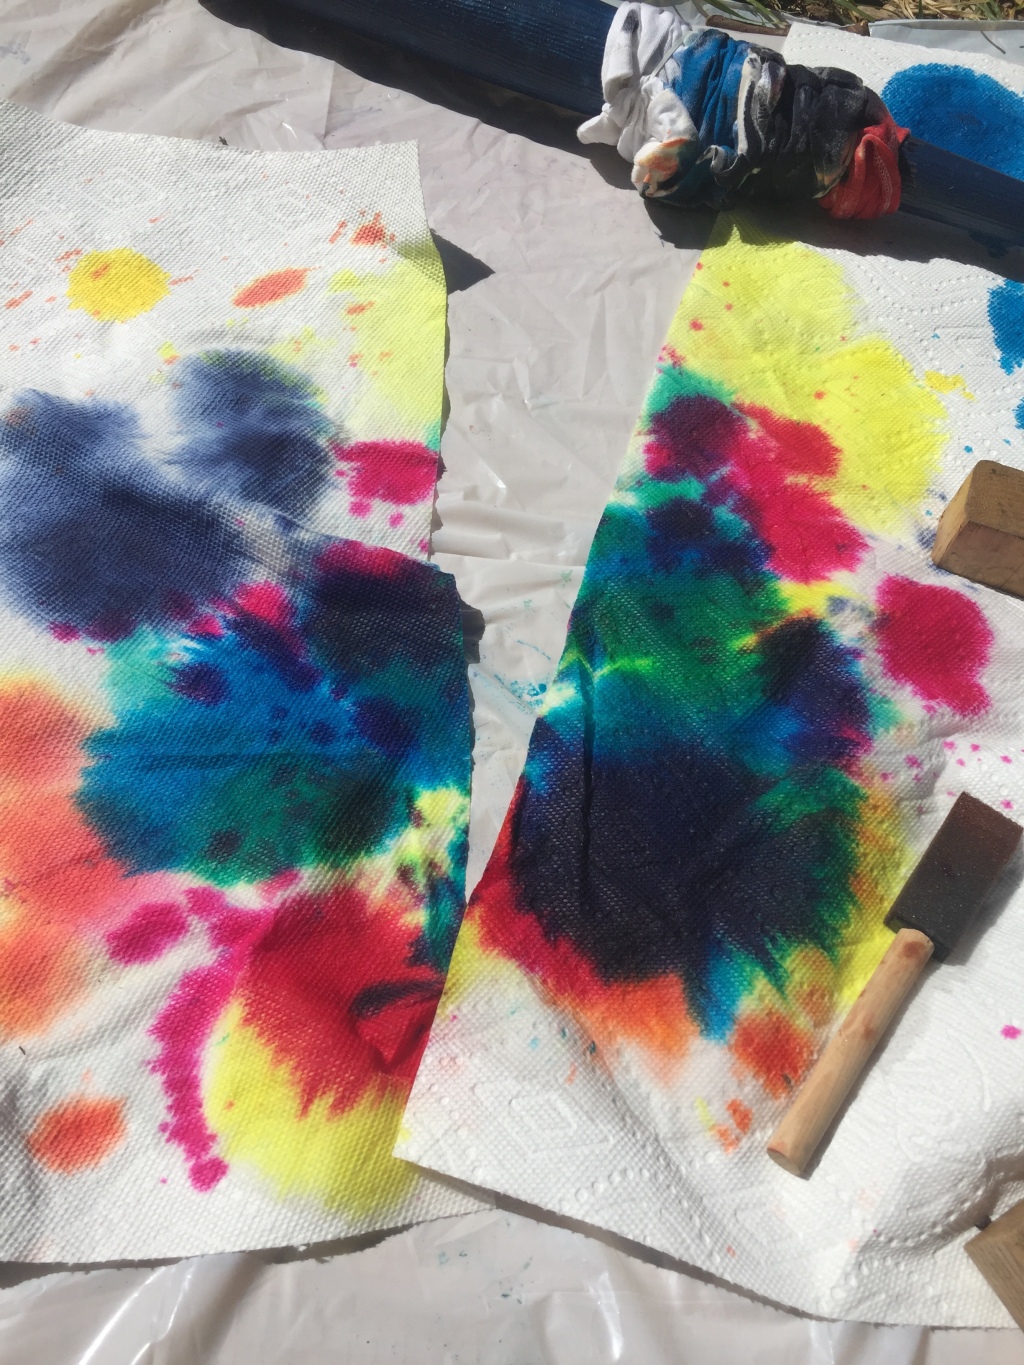 Tie-dye paper towels after dying shirts with Tulip Party Kit in a box